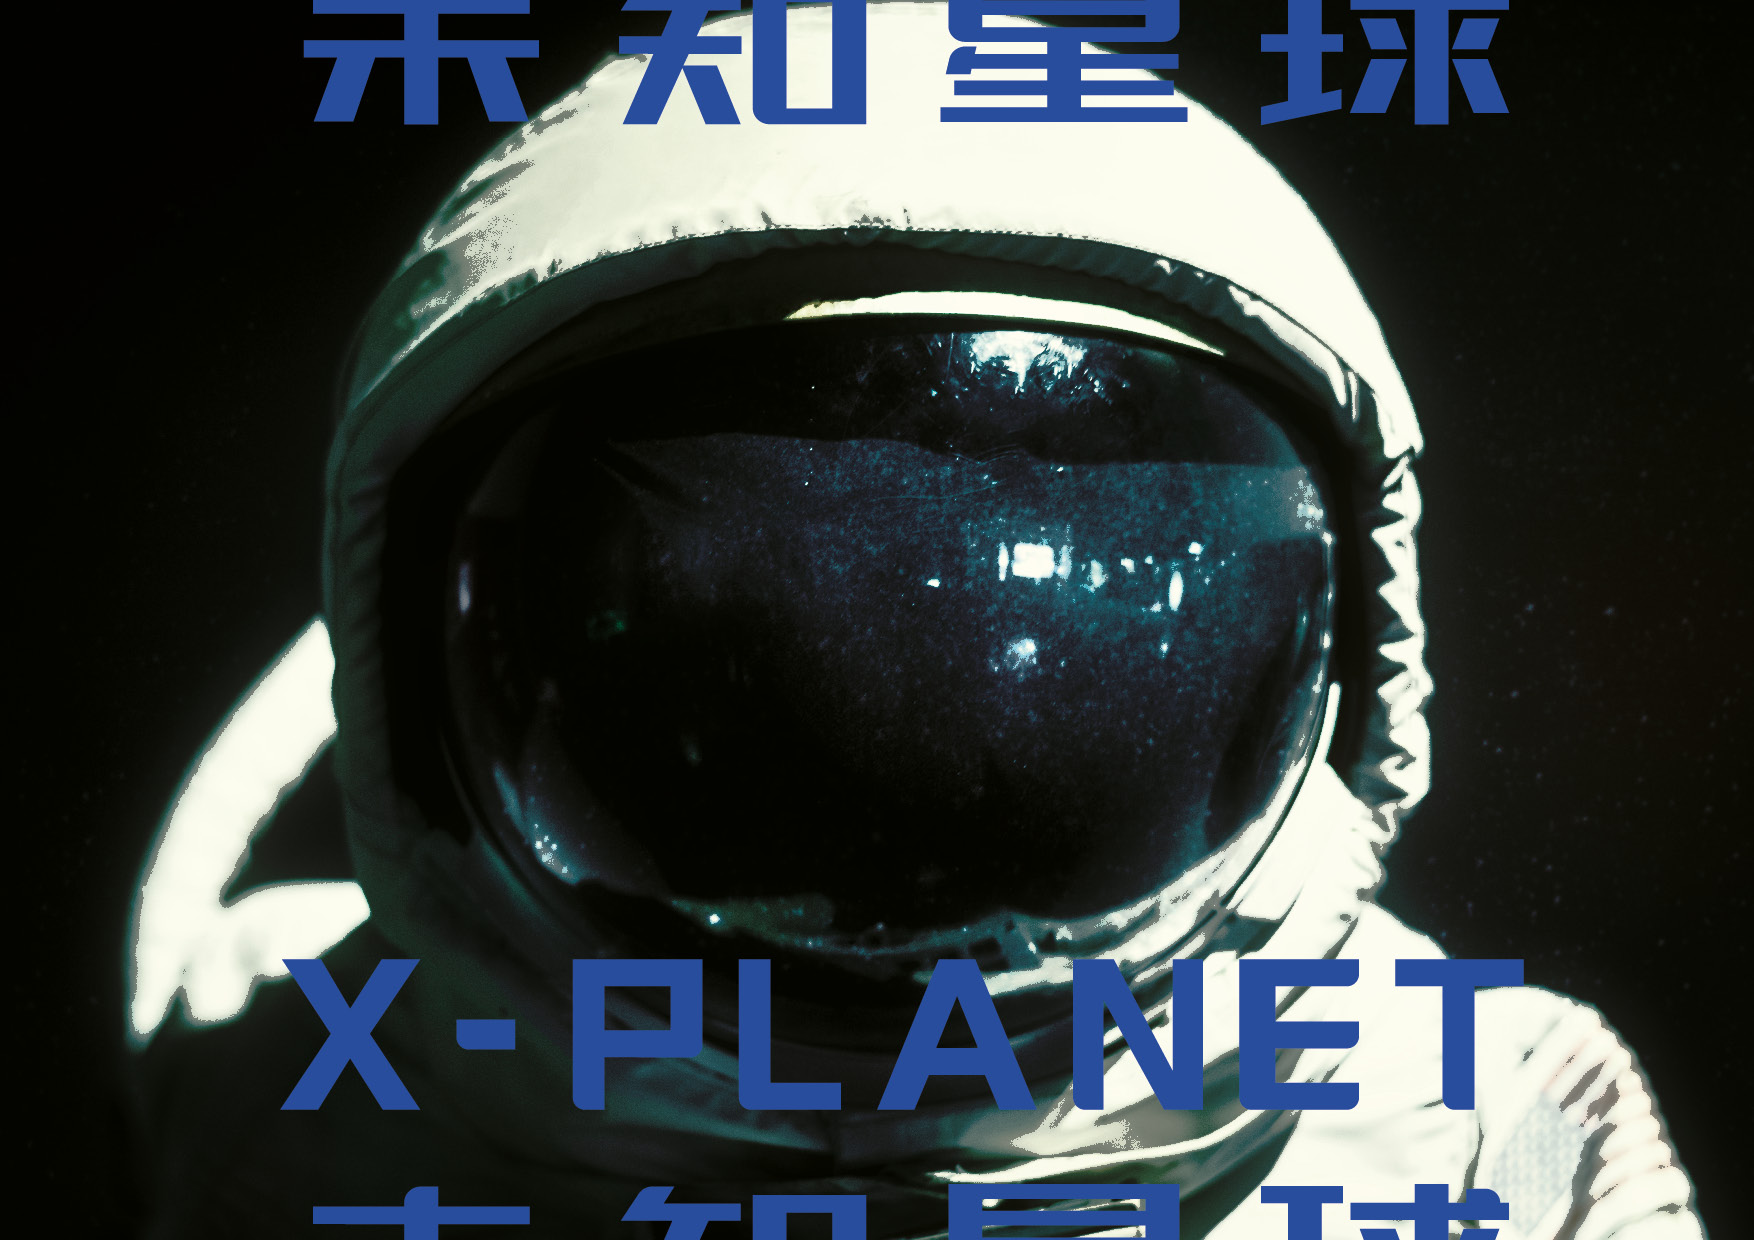 The X-Planet project involves a comprehensive upgrade of the brand's concept and image, with a focus on the idea of space relative elements, such as the Obelisk and space food.